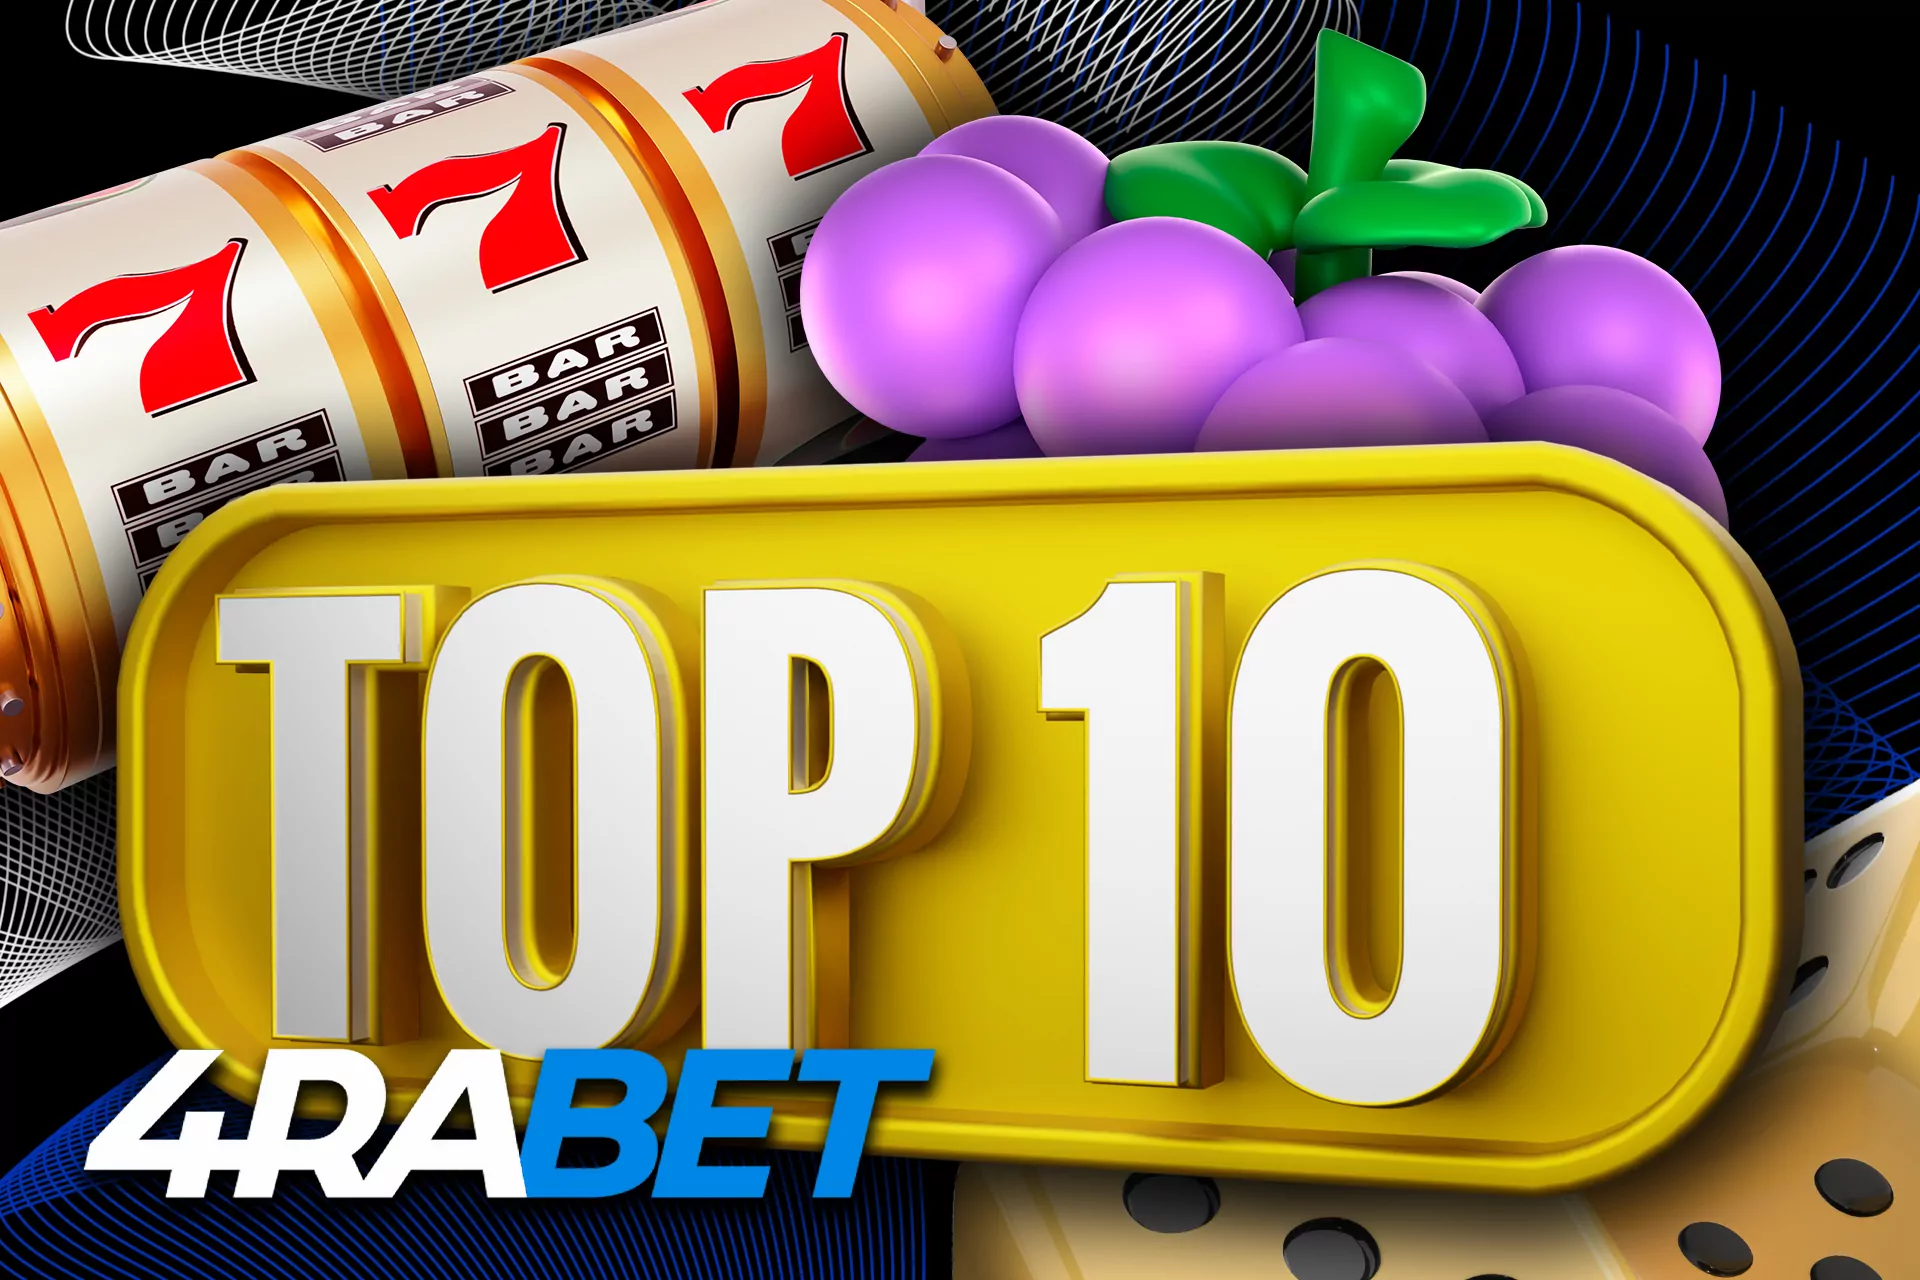 Here is a list of the best and most popular games in the 4rabet online casino.